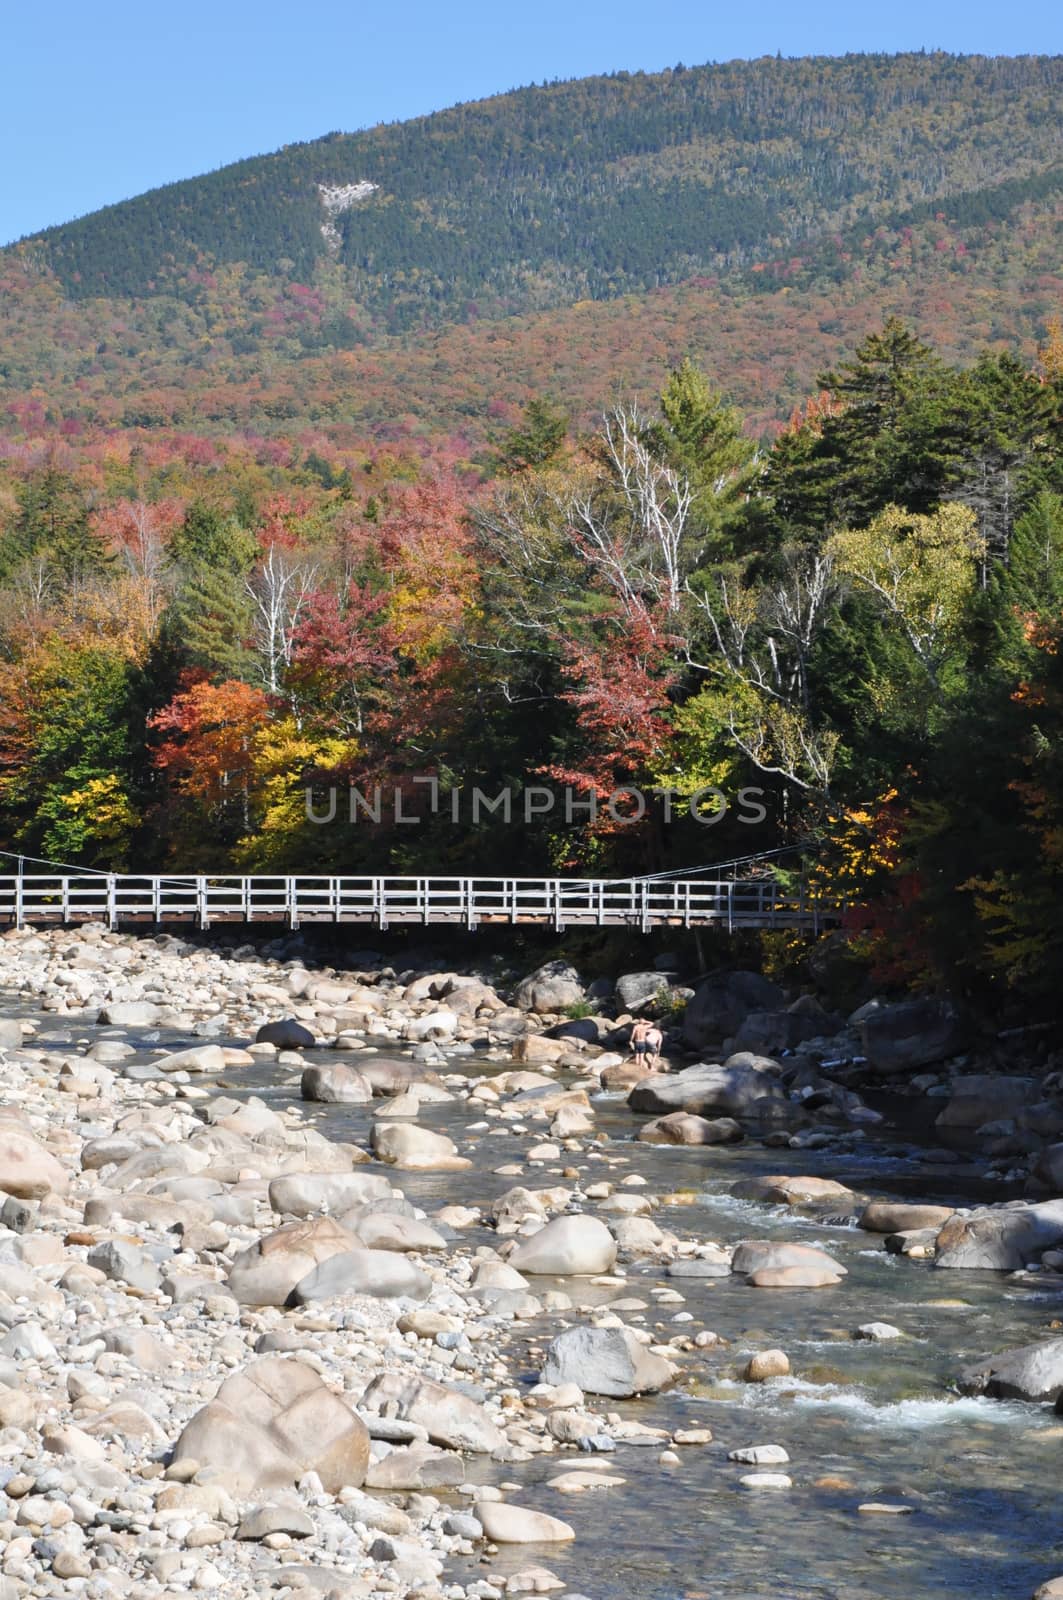 Fall Colors at the White Mountain National Forest in New Hampshire